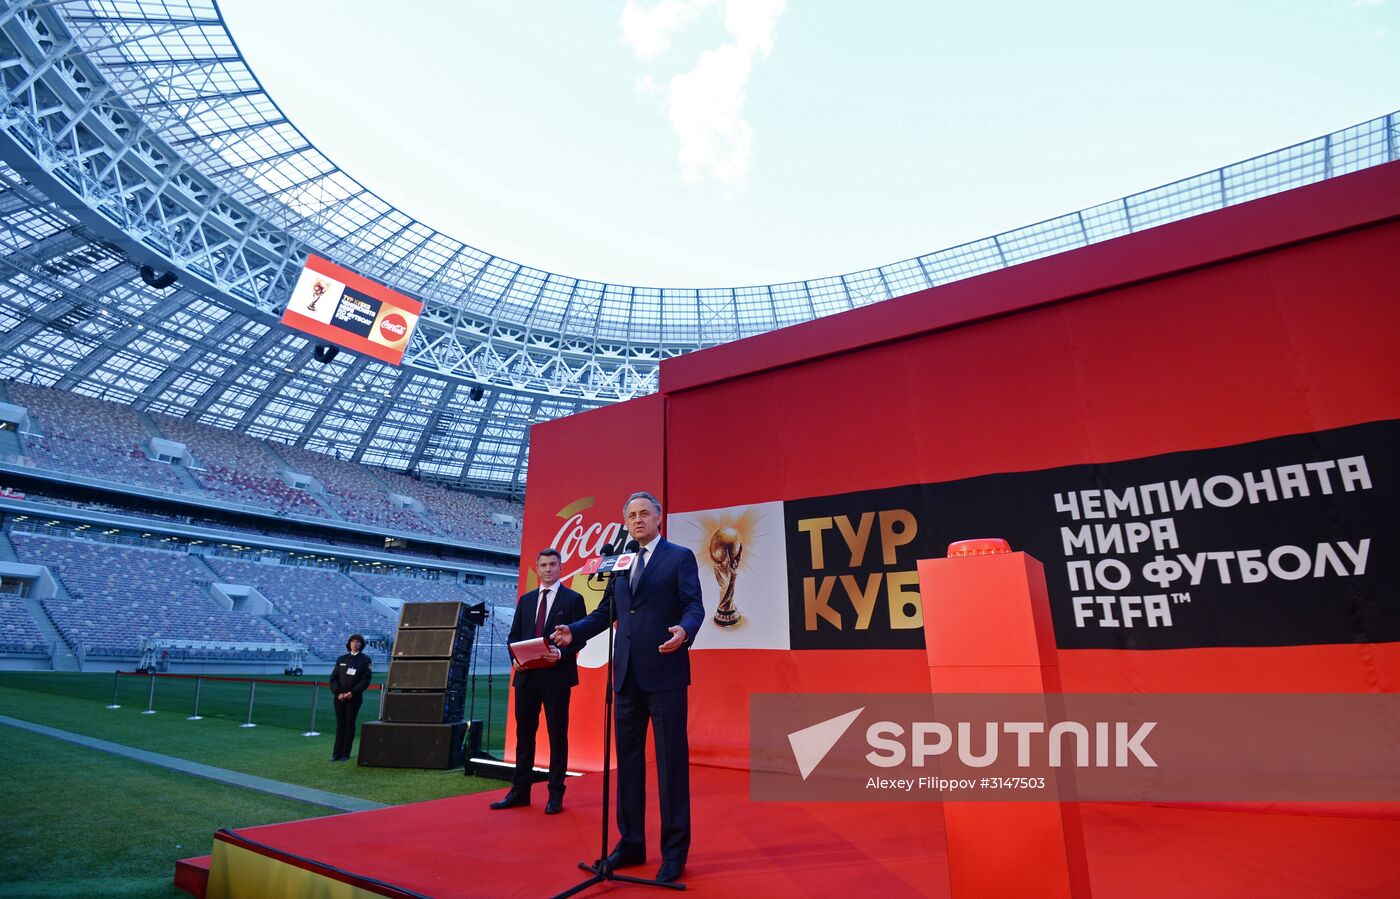 Ceremony of announcing 2018 FIFA World Cup route